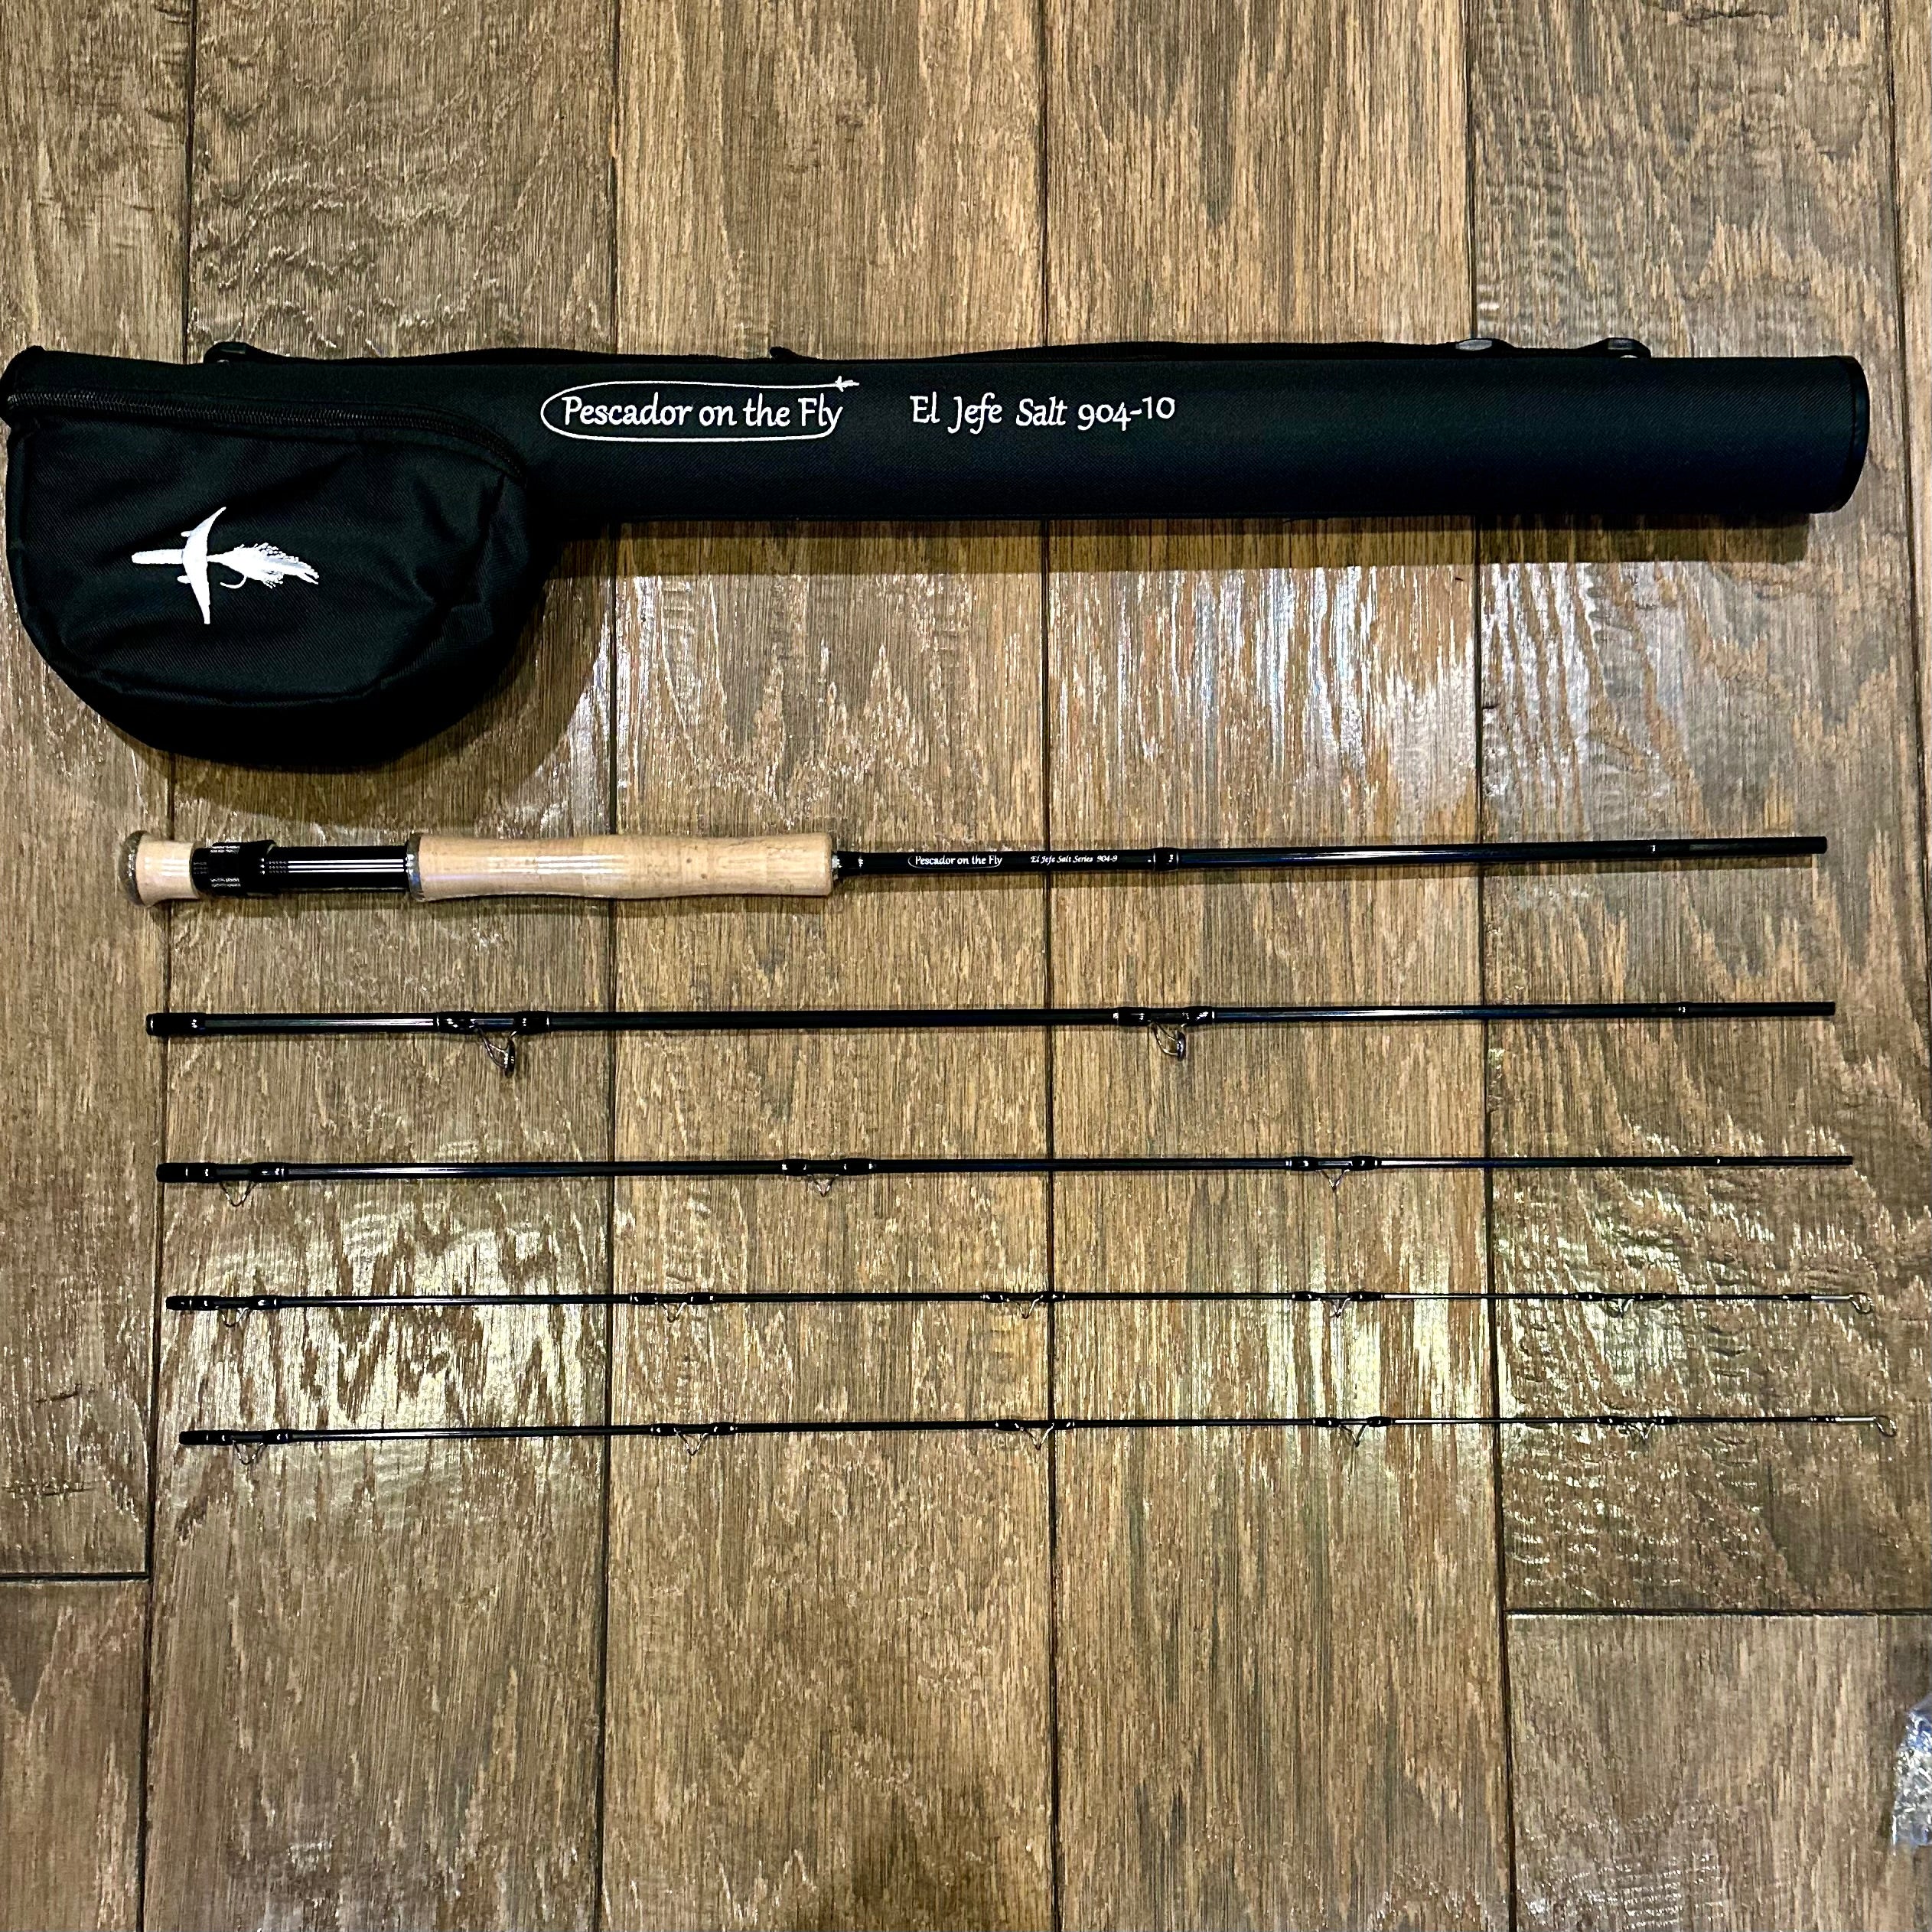 El Jefe Saltwater Fly Fishing Combo Package | 904-10 | 9' Four Section 10 Weight Fly Rod And Reel Outfit